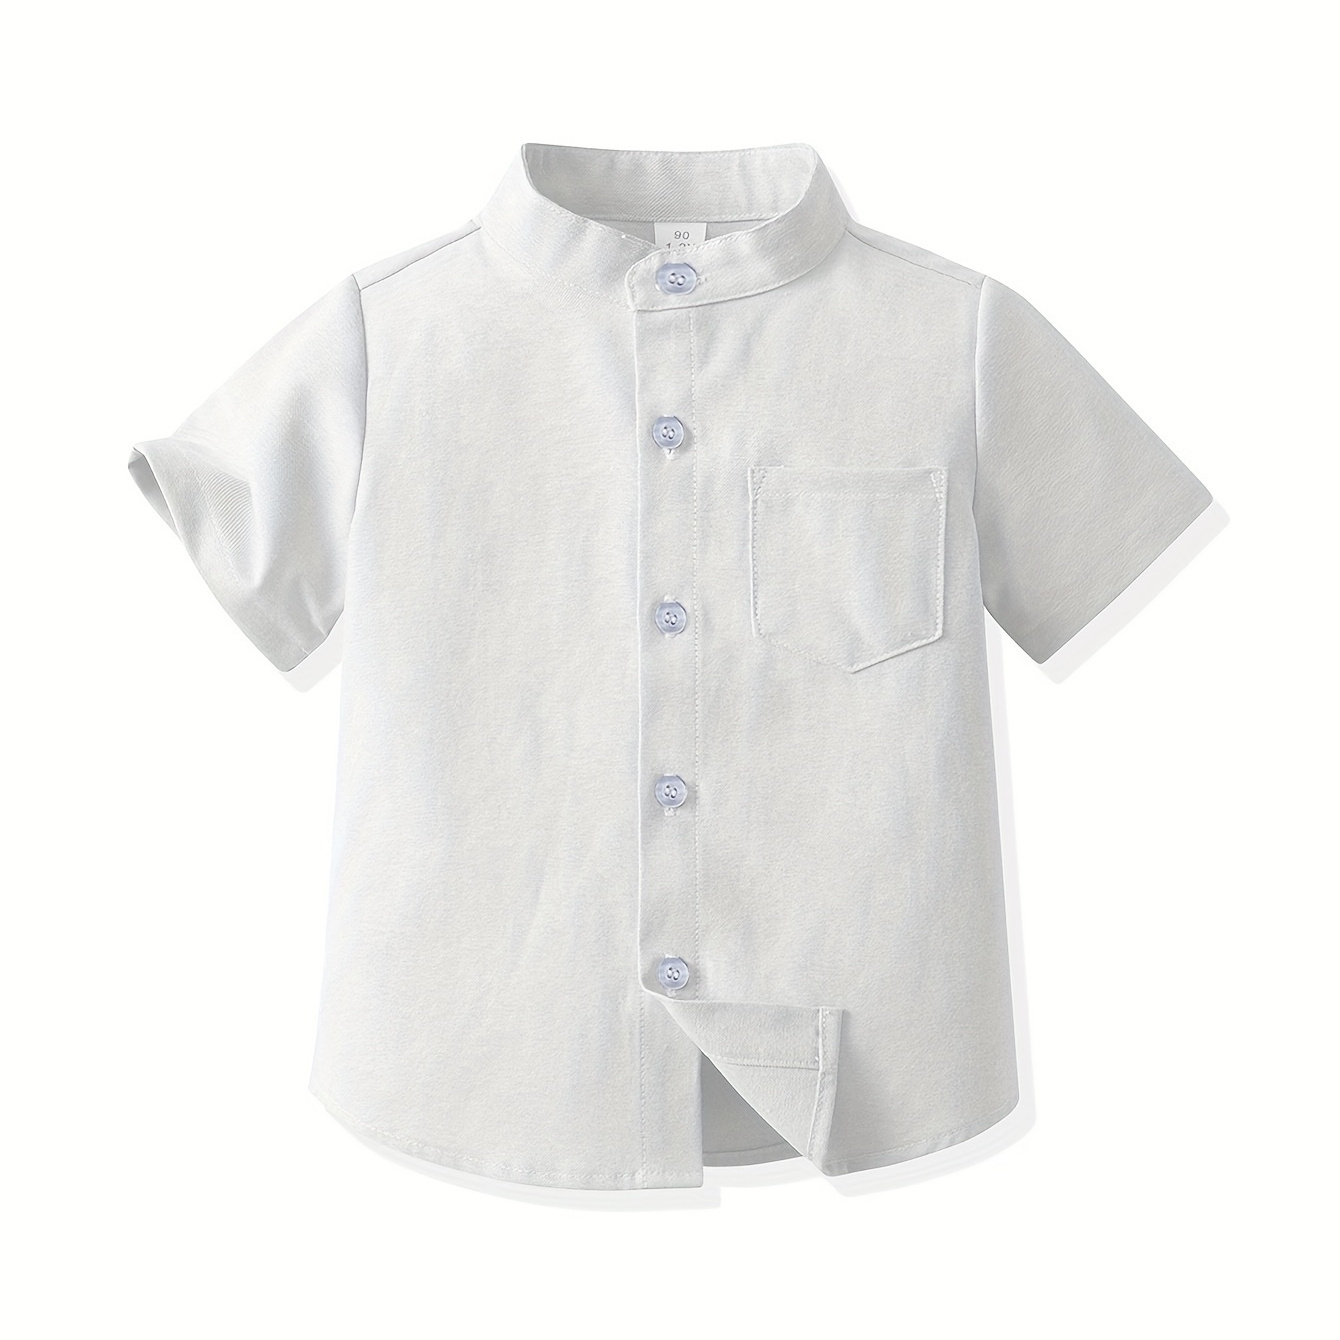 

Boy's Solid Color Band Collar Shirt For Summer, Casual Trendy Short Sleeve Shirt For Party/festival